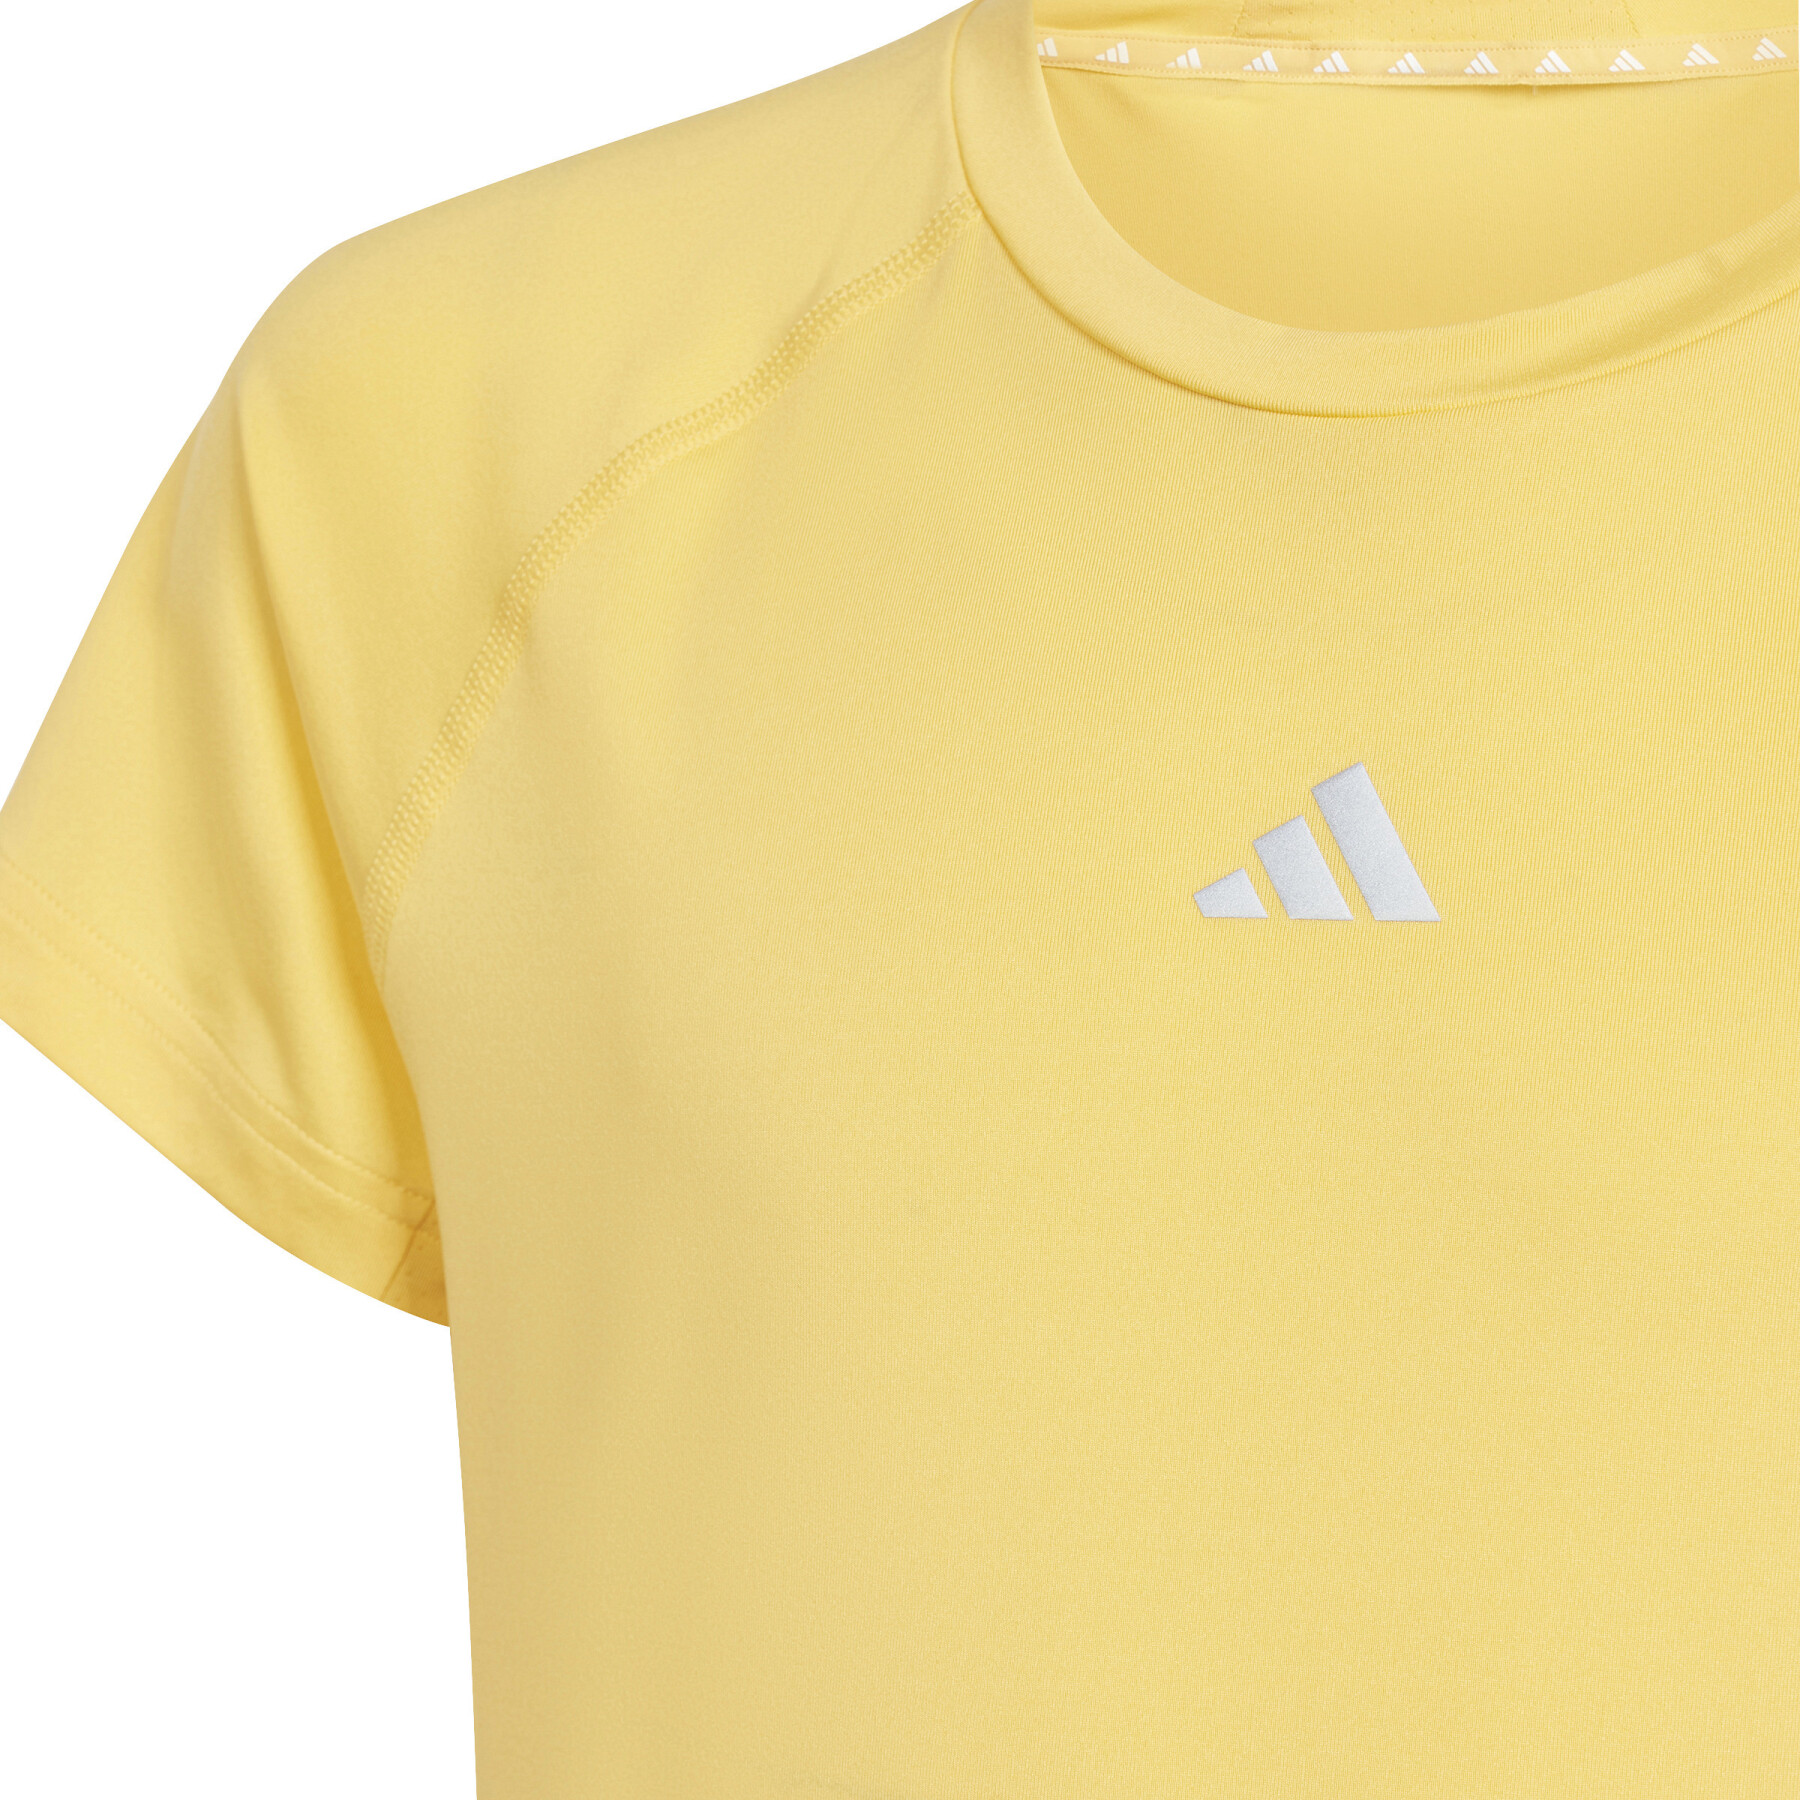 Girl's jersey athletic top adidas